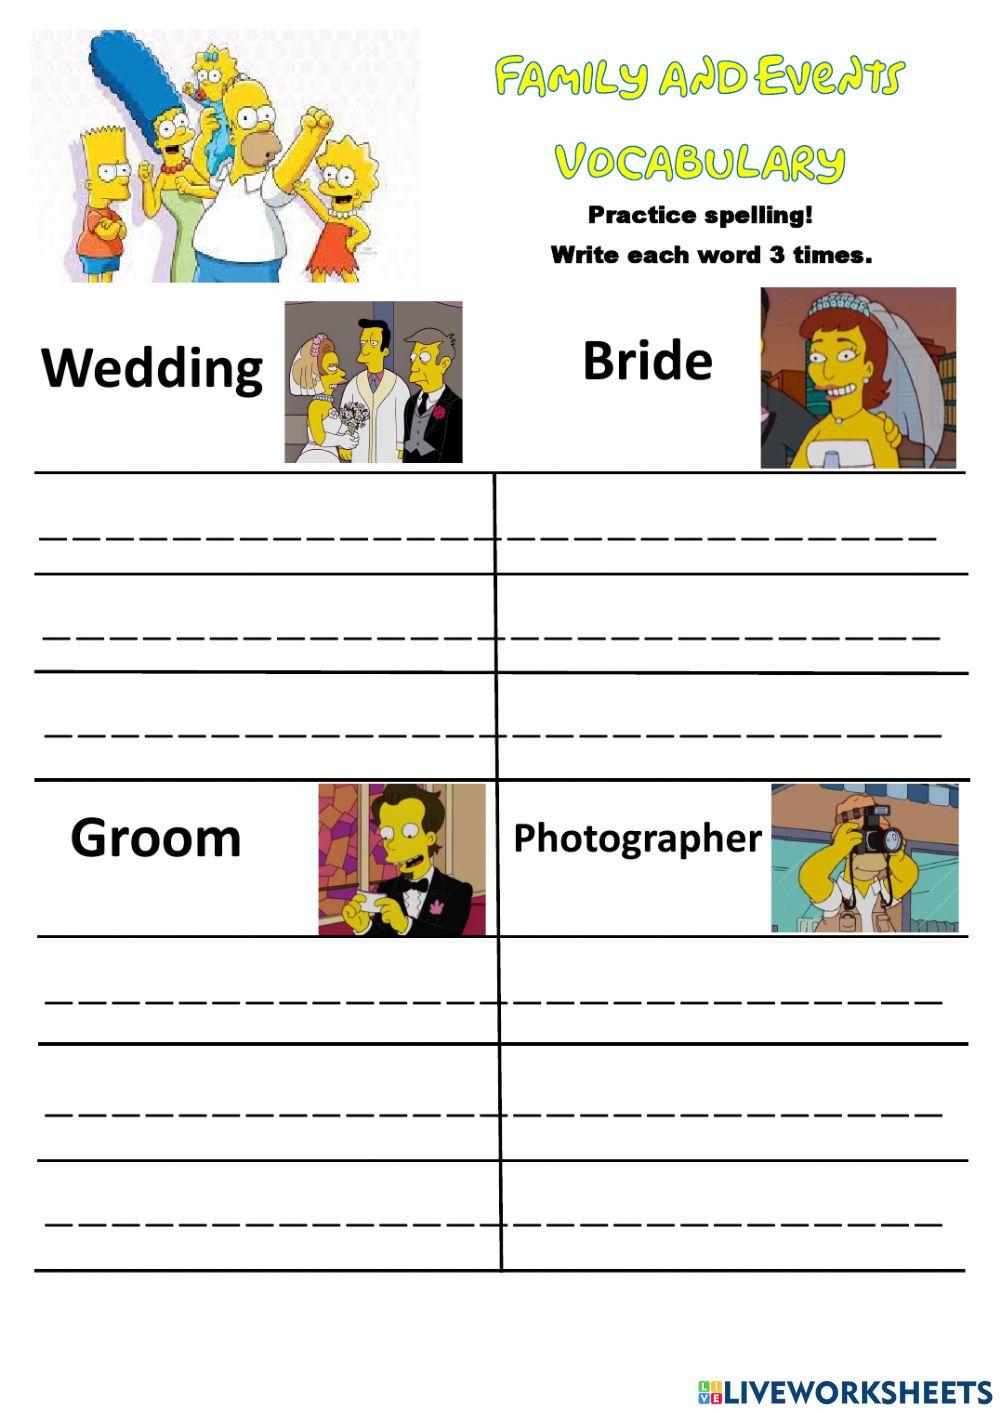 Family and Events Vocabulary